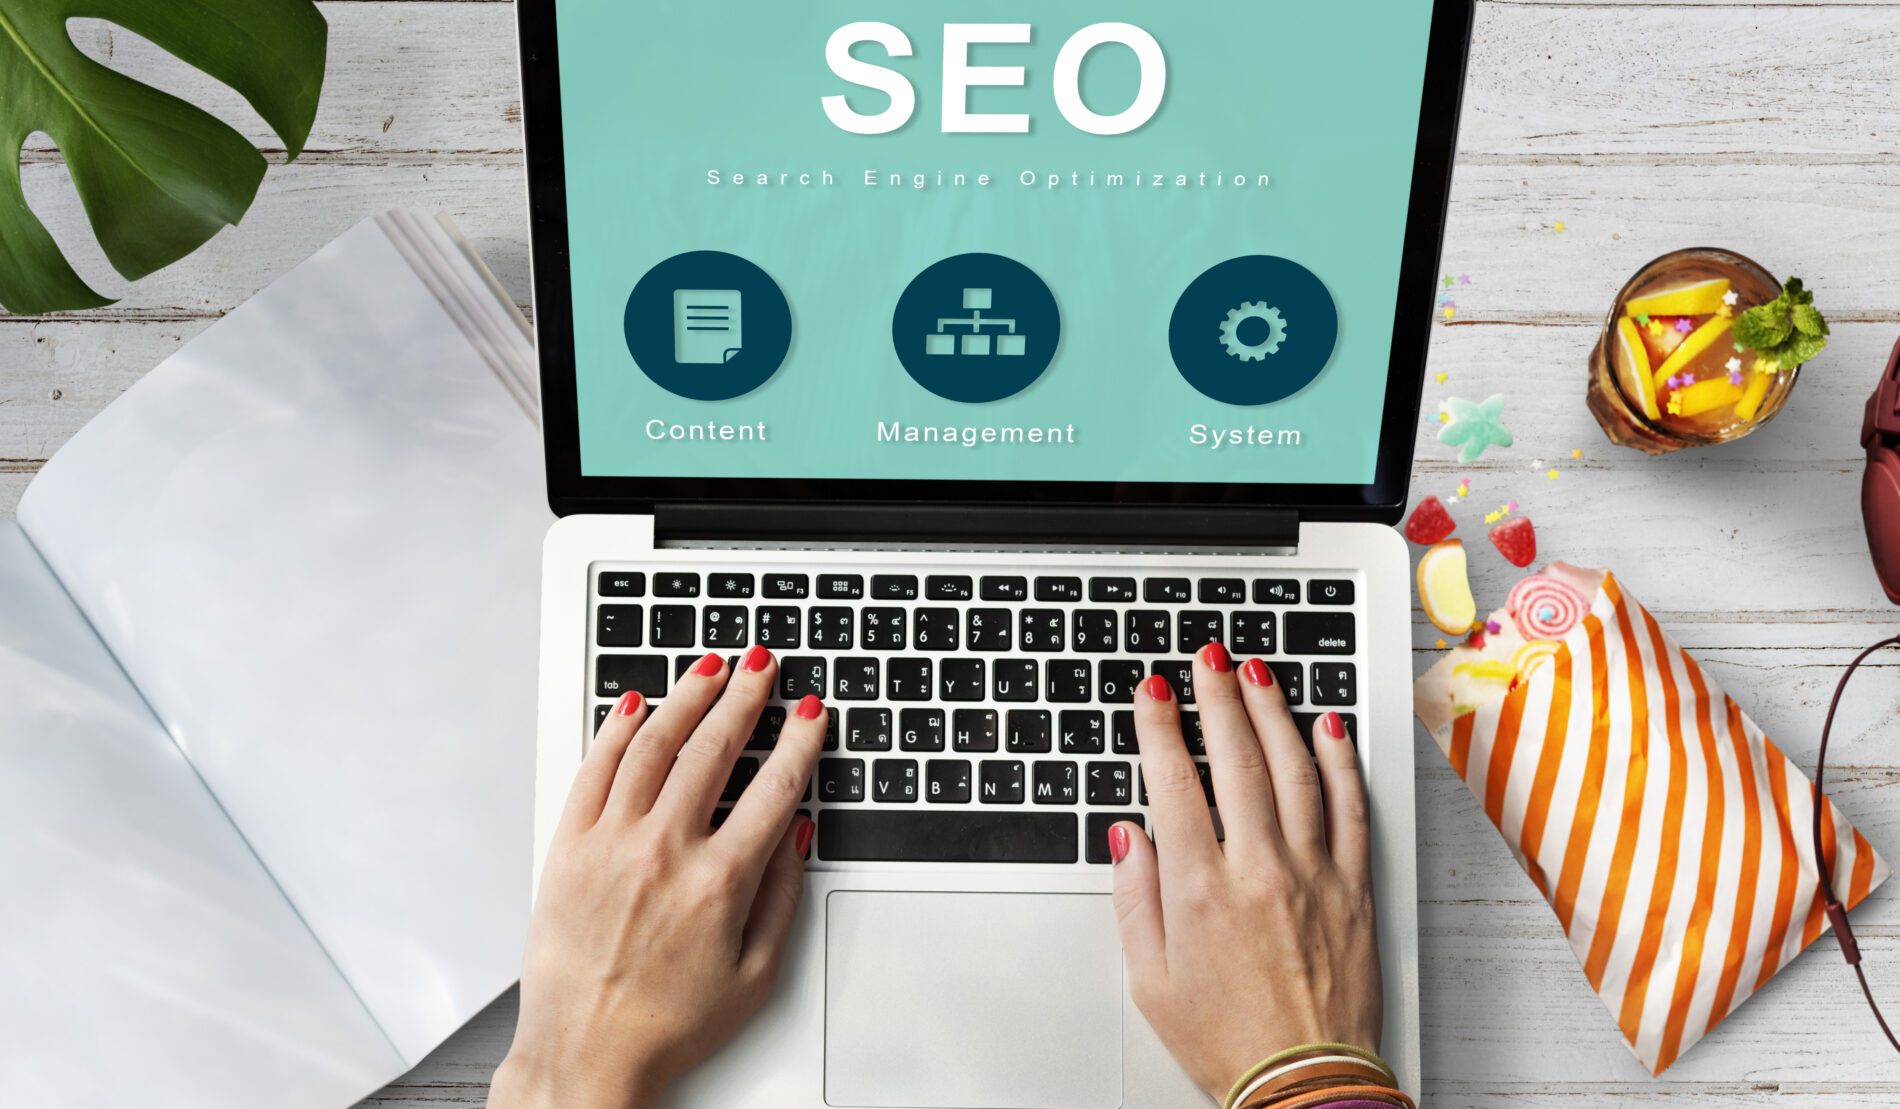 What is SEO Services and Why Should You Care?